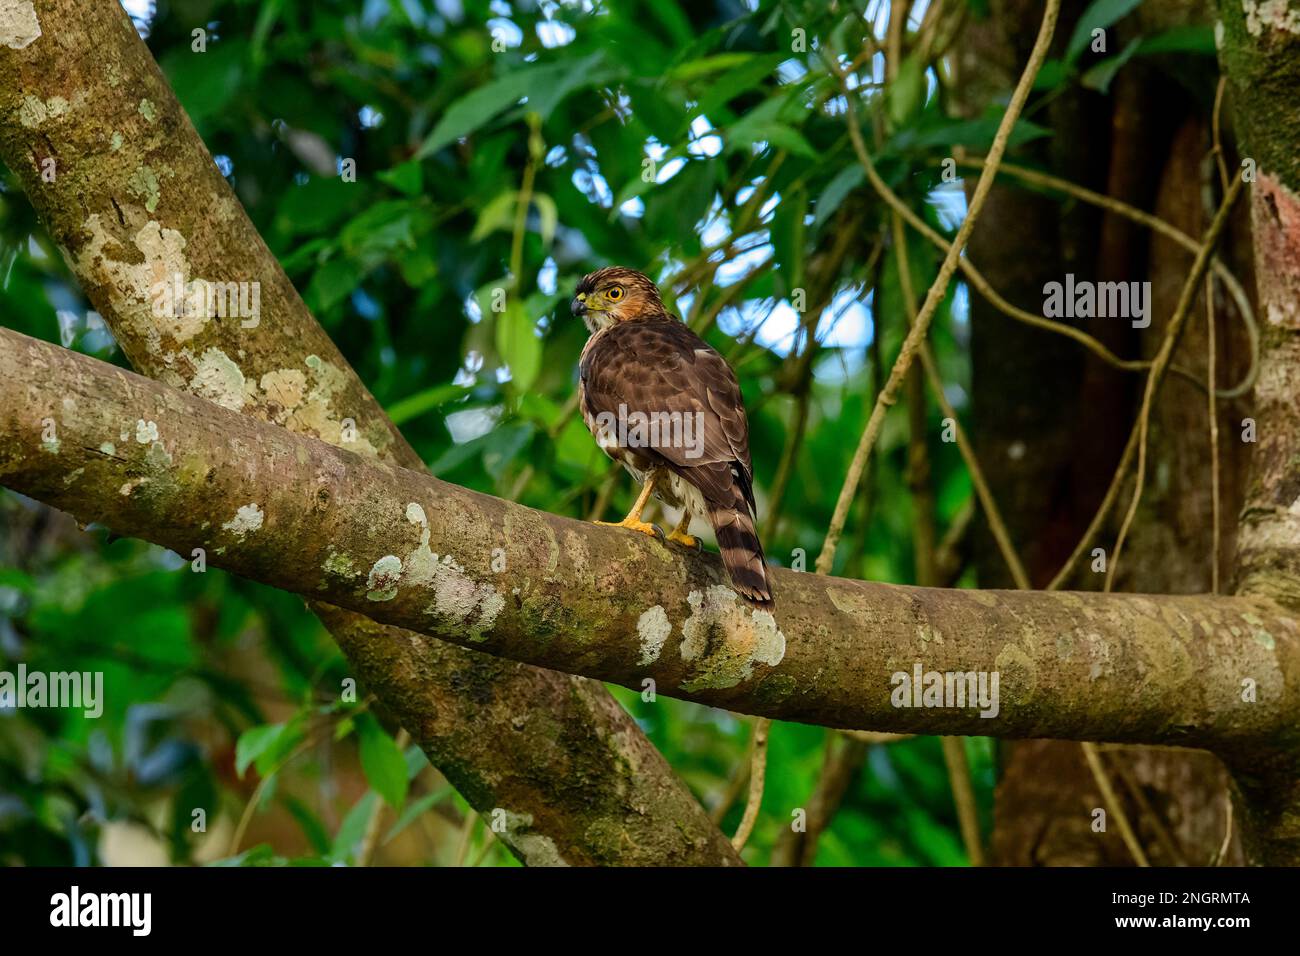 The crested goshawk is a bird of prey from tropical Asia. It has short broad wings and a long tail, both adaptations to maneuvering through trees. Stock Photo